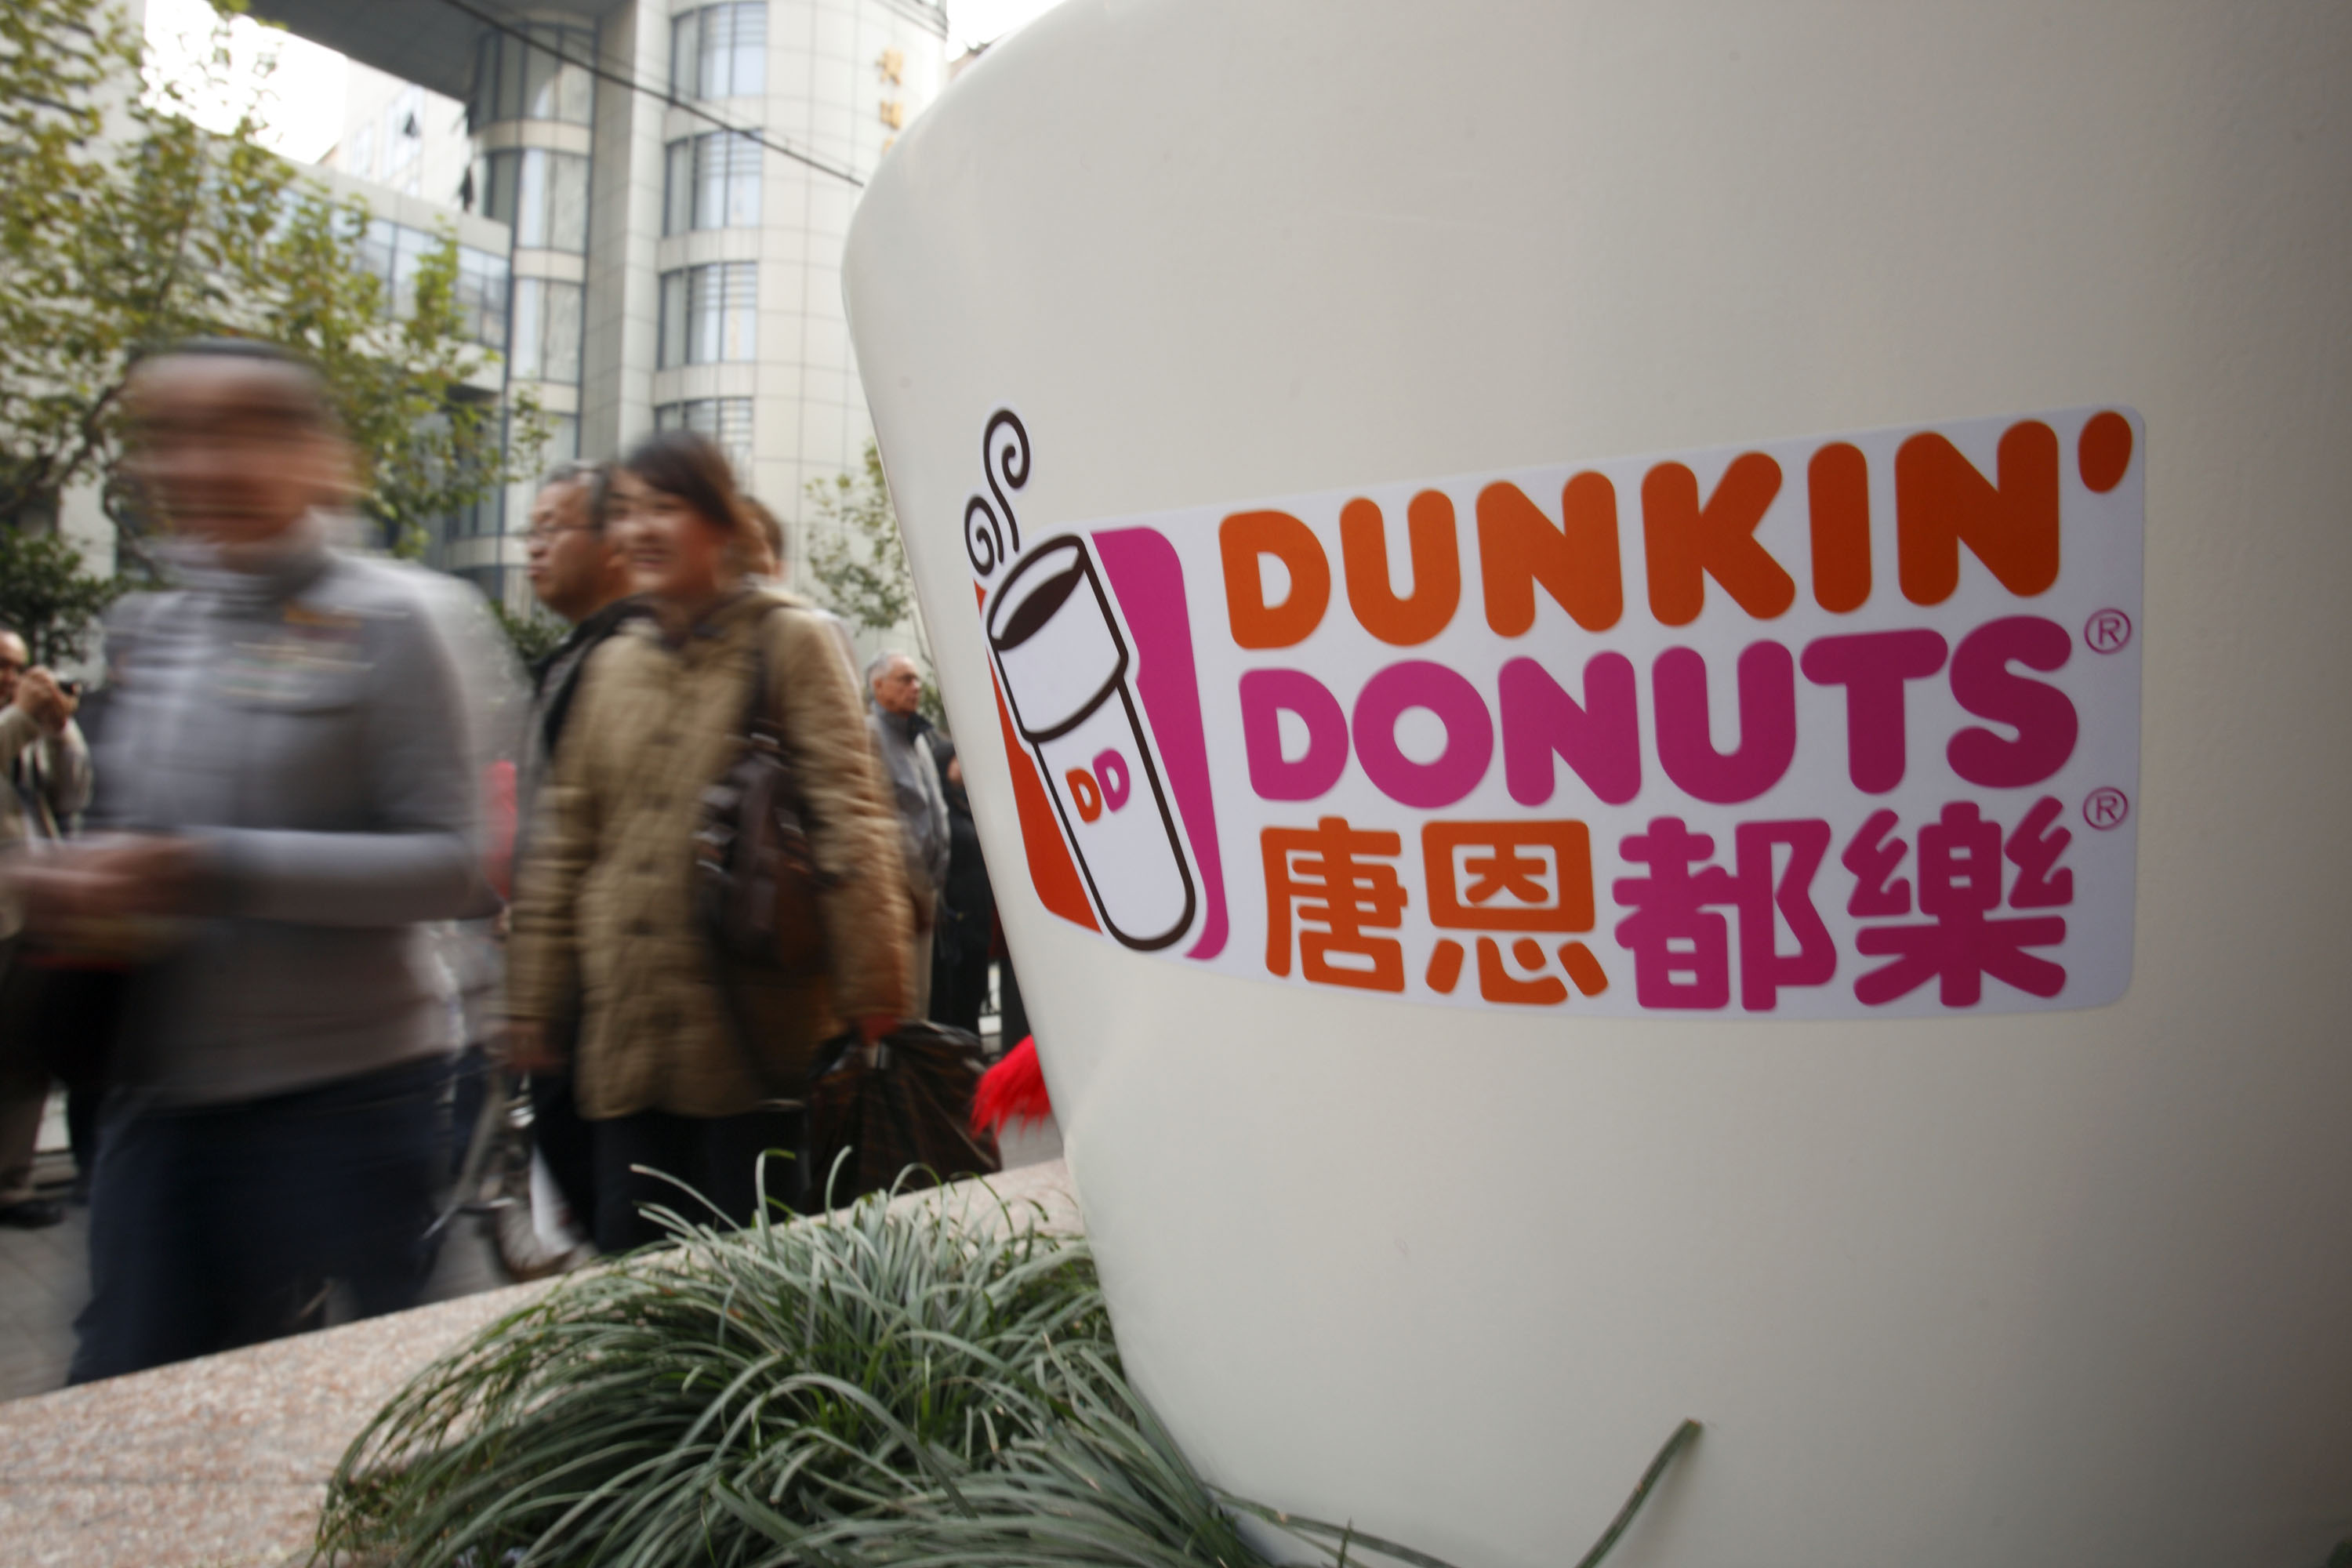 Pedestrians walk past the Dunkin' Donuts logo at the opening ceremony of the company's flagship store in Shanghai, China, on Nov. 20, 2008. (Bloomberg via Getty Images)